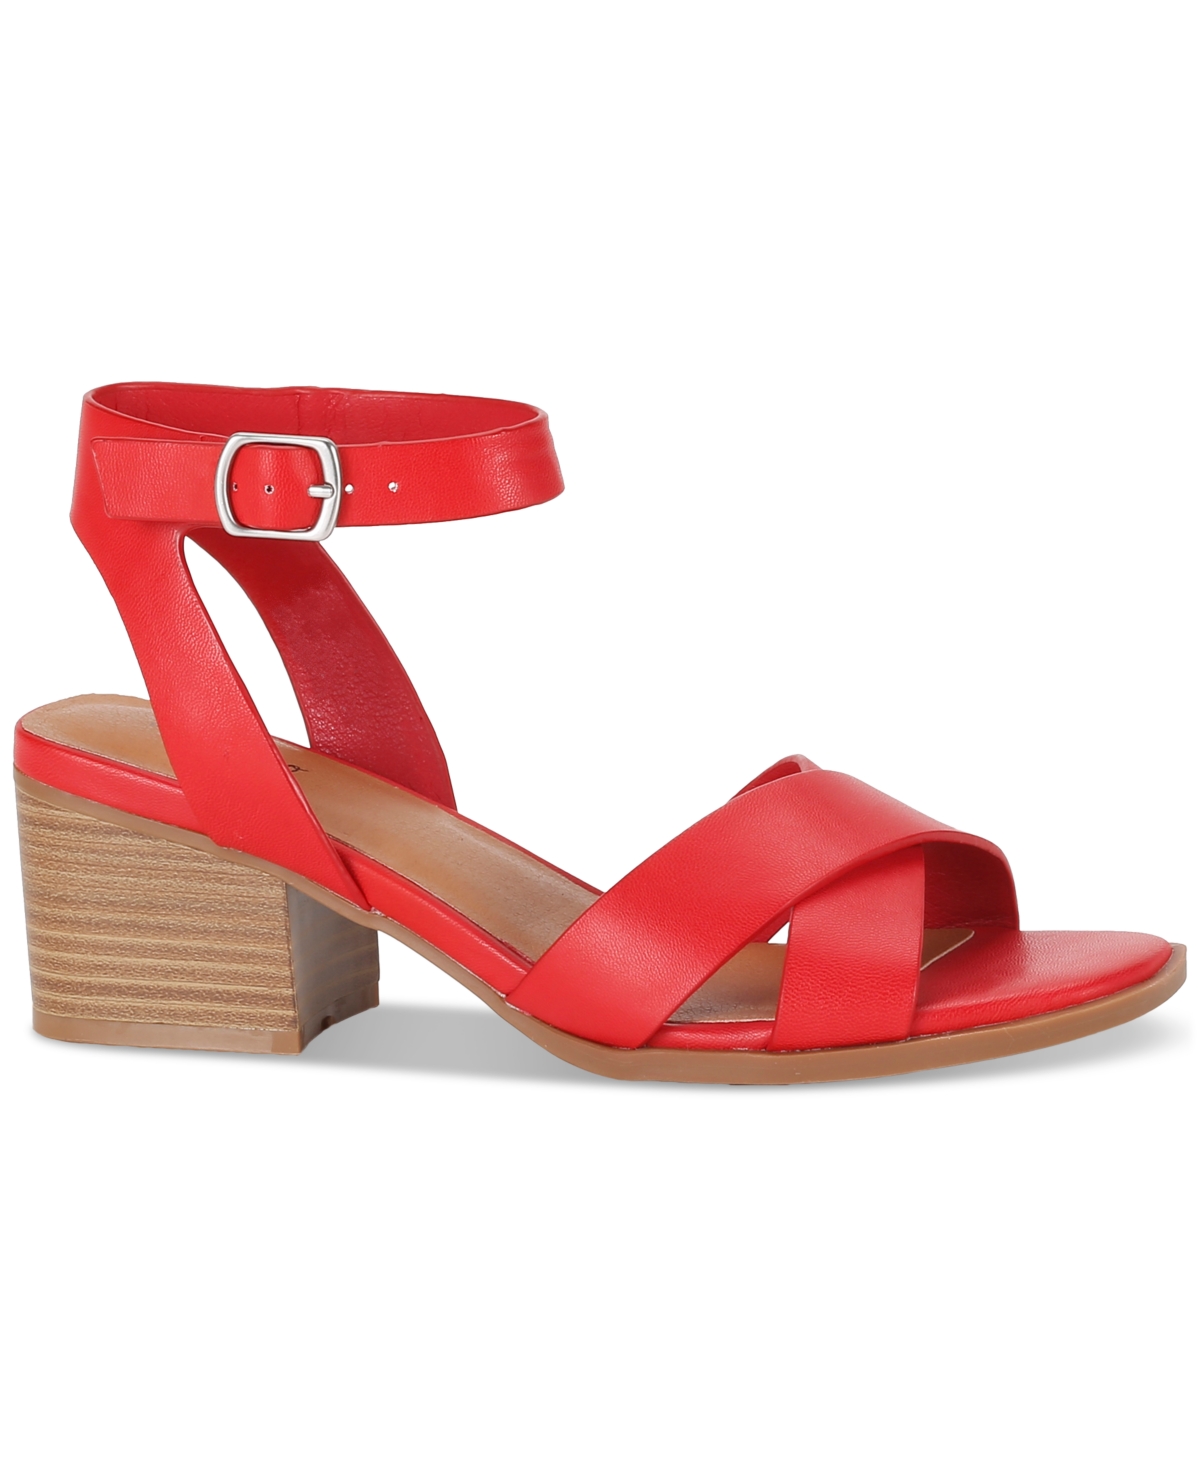 Style & Co Mailena Wedge Espadrille Sandals, Created for Macy's - Macy's